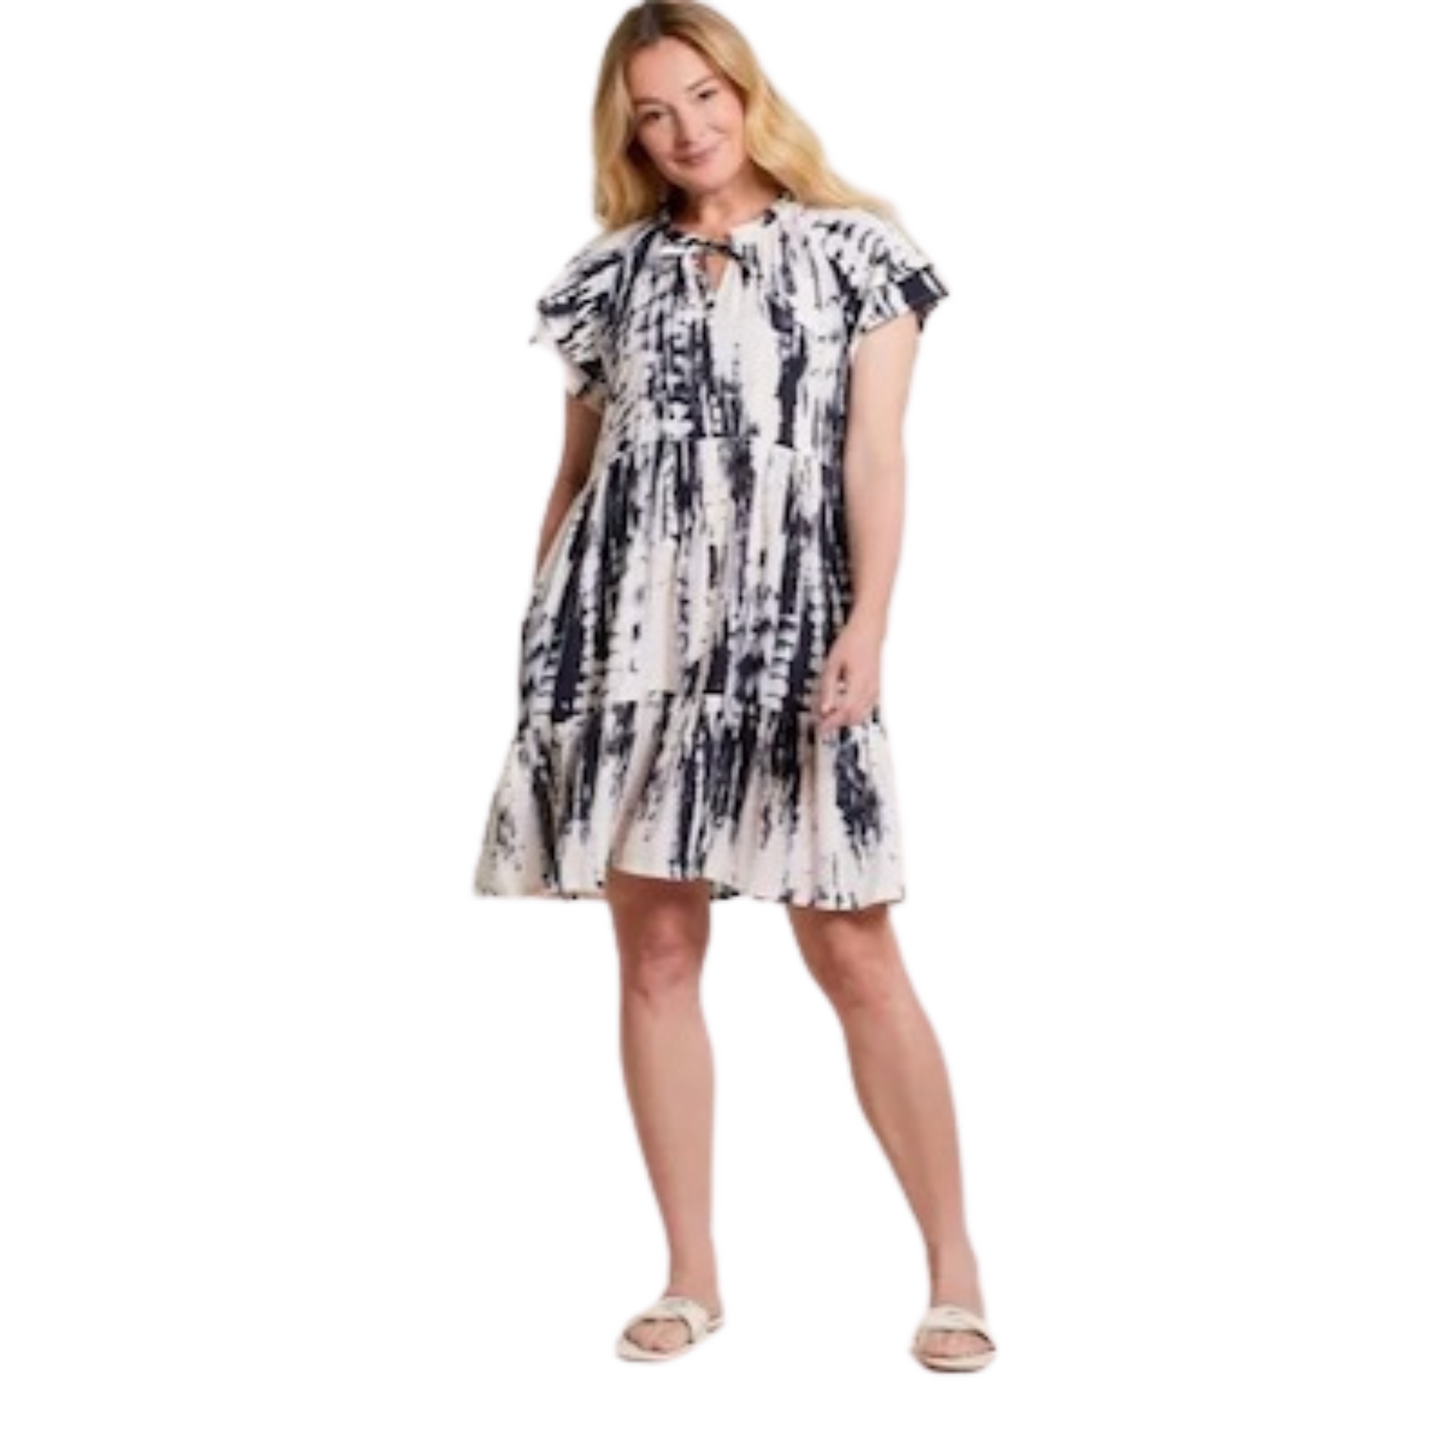 A comfy fit and striking print make this dress the front-runner in our spring wardrobe lineup. We're captivated by the flowy fabric with tiers from top to bottom, 36" length, and a notch neck framed by a frilled edge and a tie-up drawcord. It's effortless appeal makes a seriously stylish statement.